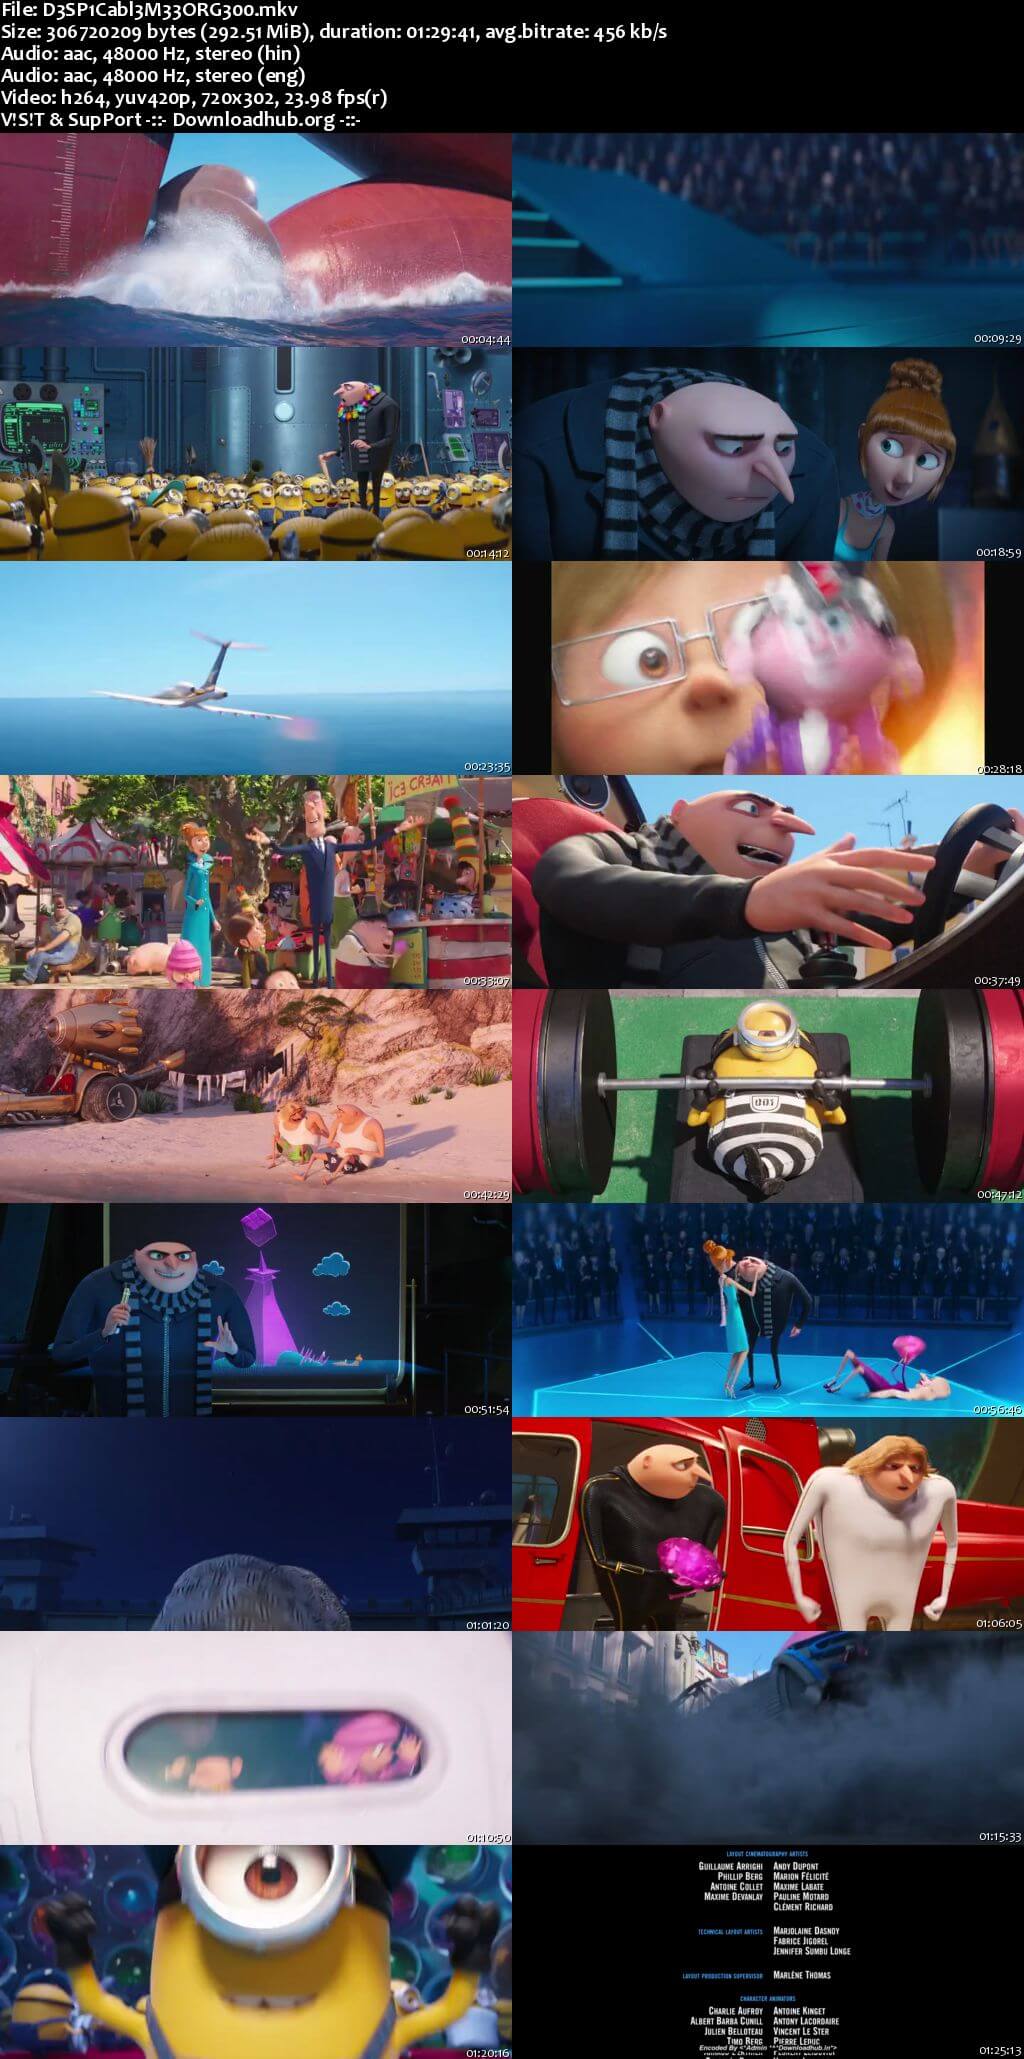 Despicable Me 3 download the last version for windows